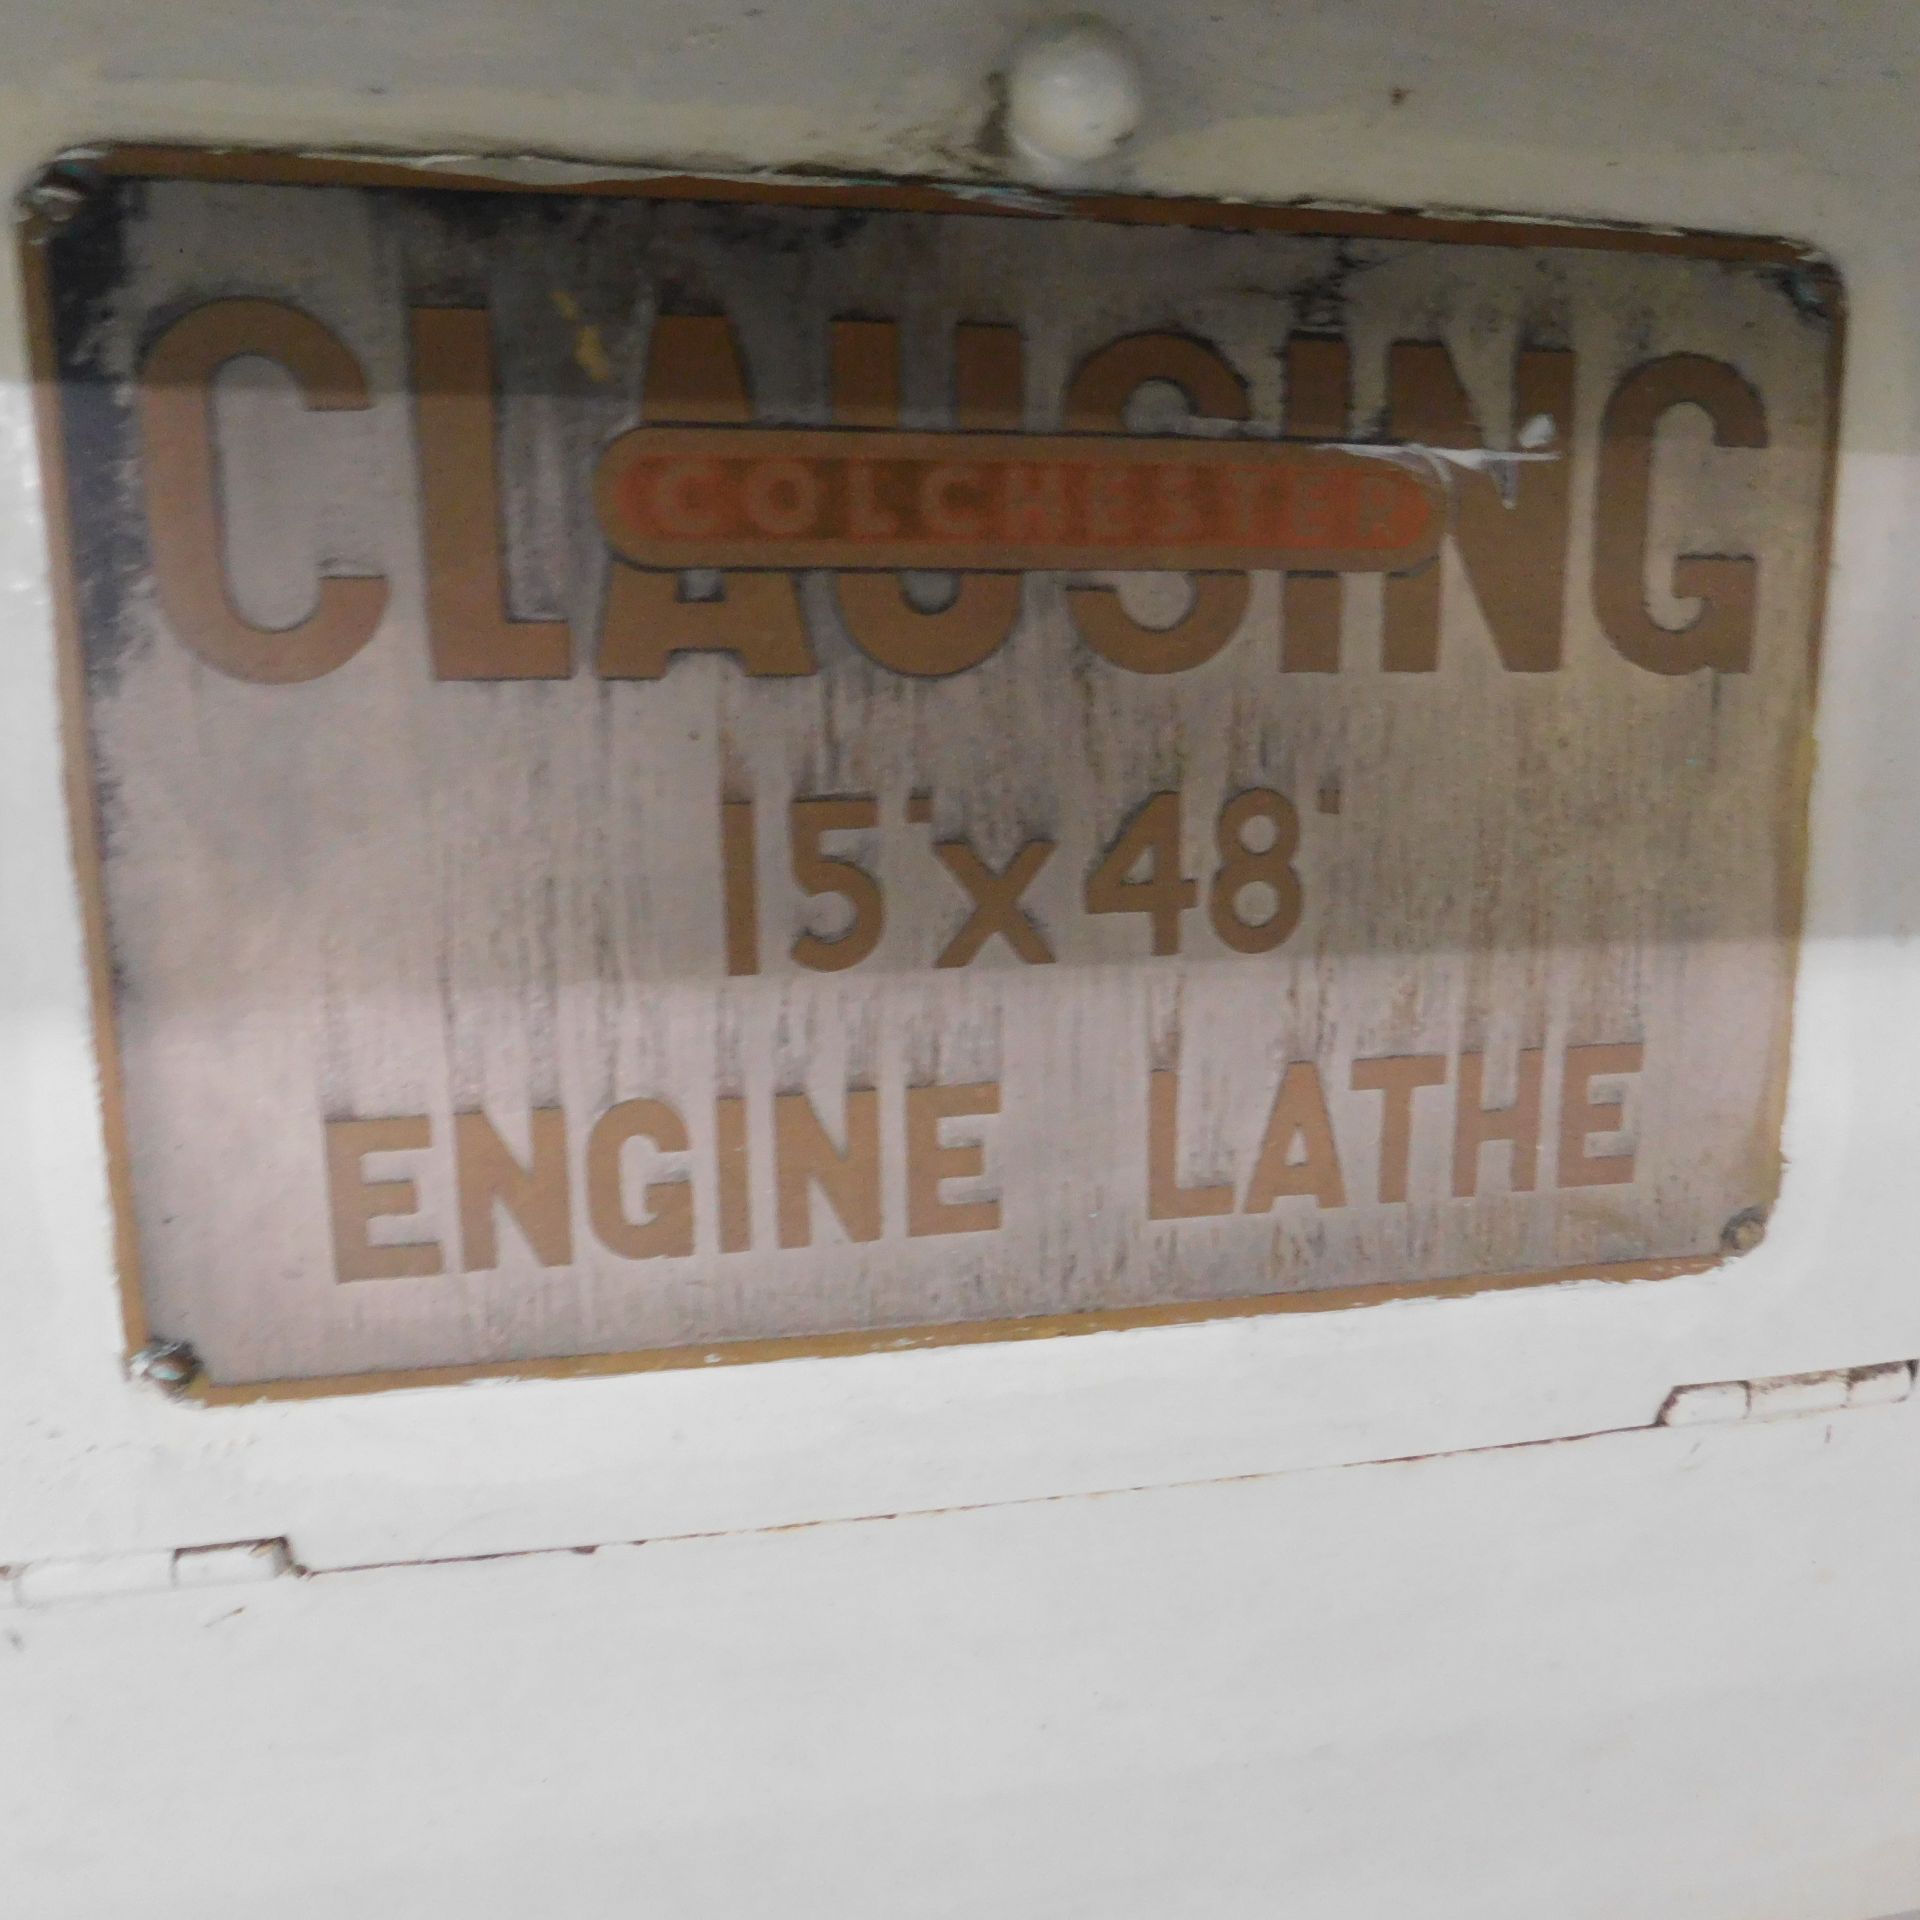 Clausing Colchester 15" X 48" Engine Lathe, s/n 4/46419, 8" 3-Jaw Chuck - Image 5 of 5